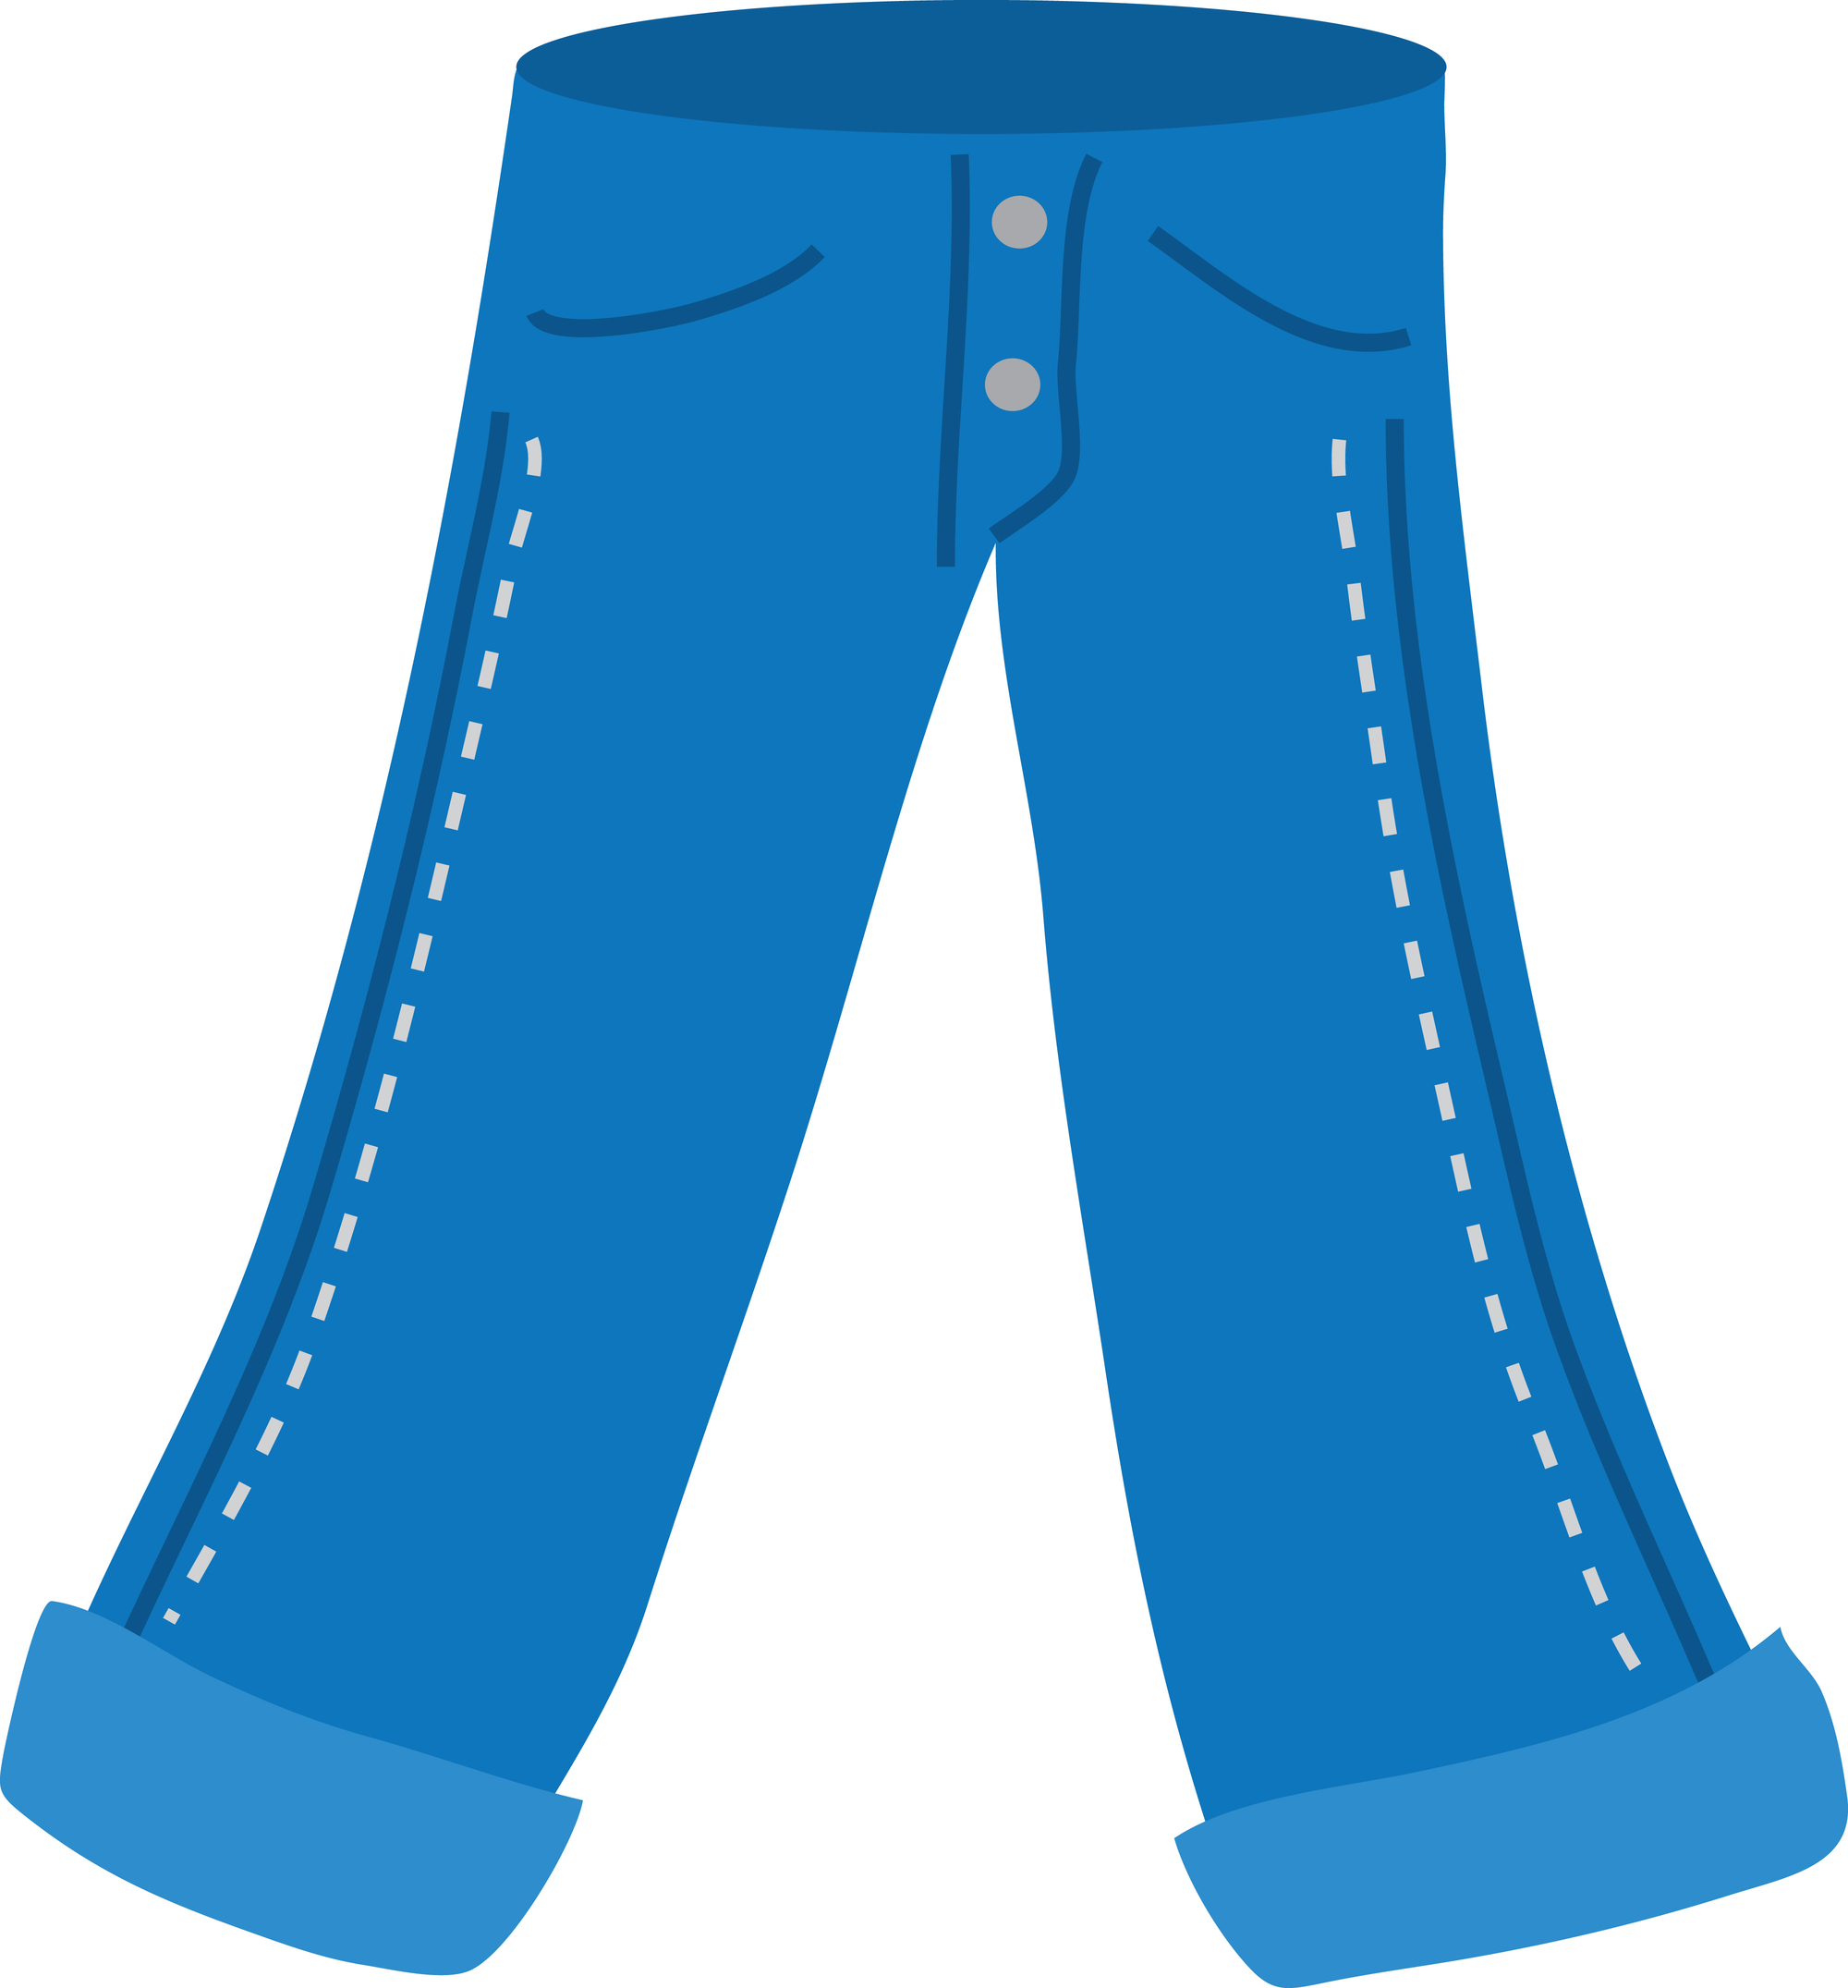 Pants clipart free images jpg